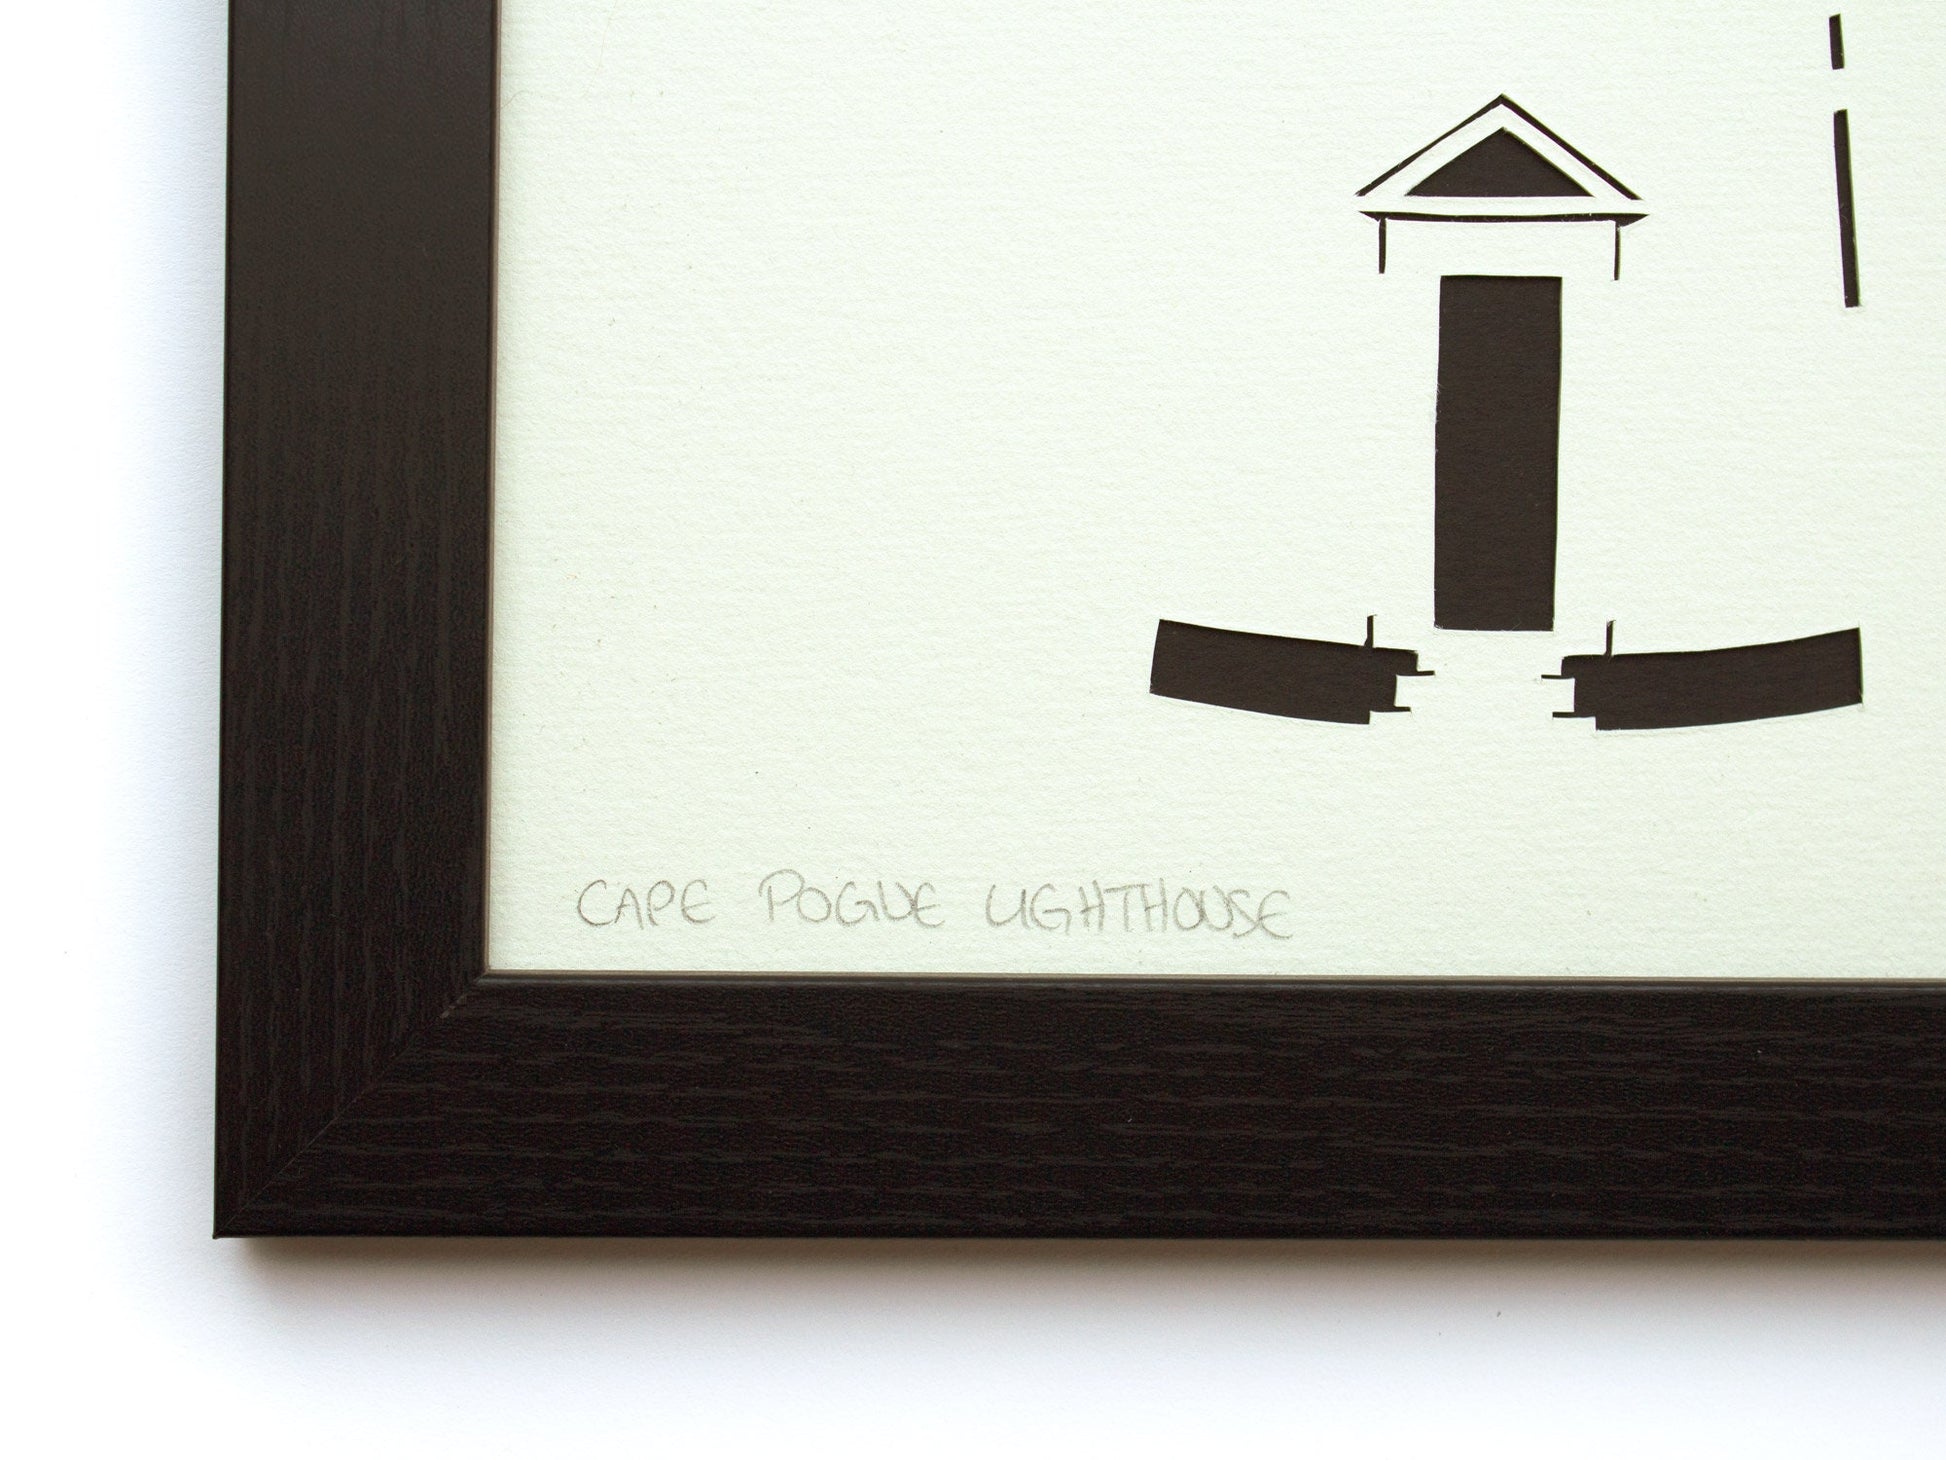  Framed simple black and white cut paper illustration of Cape Pogue Lighthouse on Chappaquiddick in Edgartown, Martha's Vineyard.